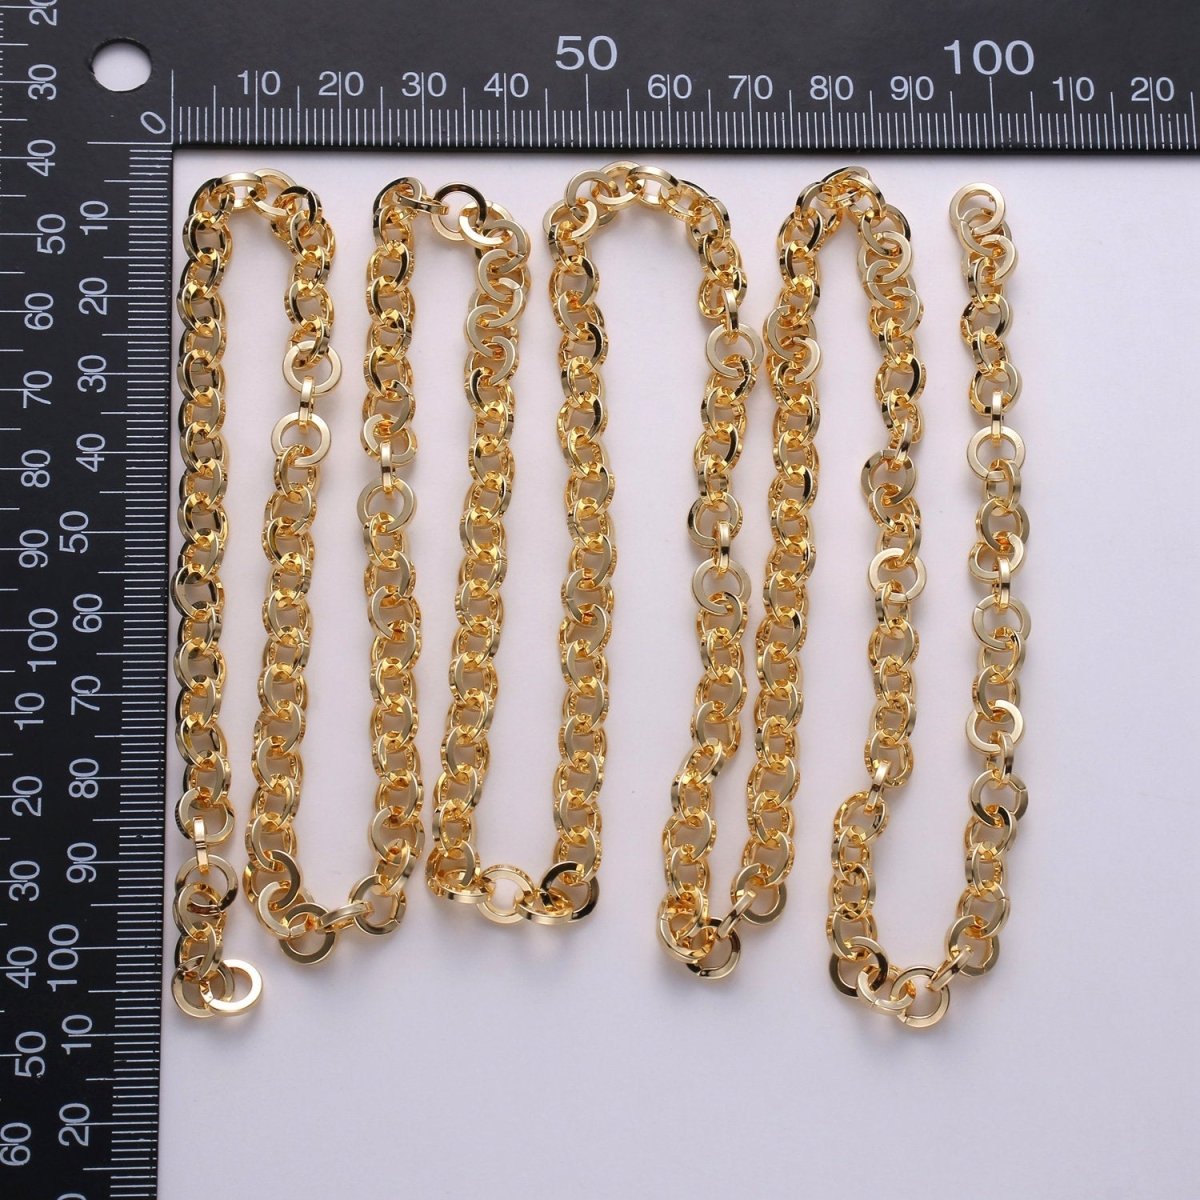 Gold Rolo Chain, 7mm Width, 16K Gold Filled Thin Flat Minimalist Jewelry, For Necklace Anklet Bracelet Supply Component | ROLL-273 Clearance Pricing - DLUXCA